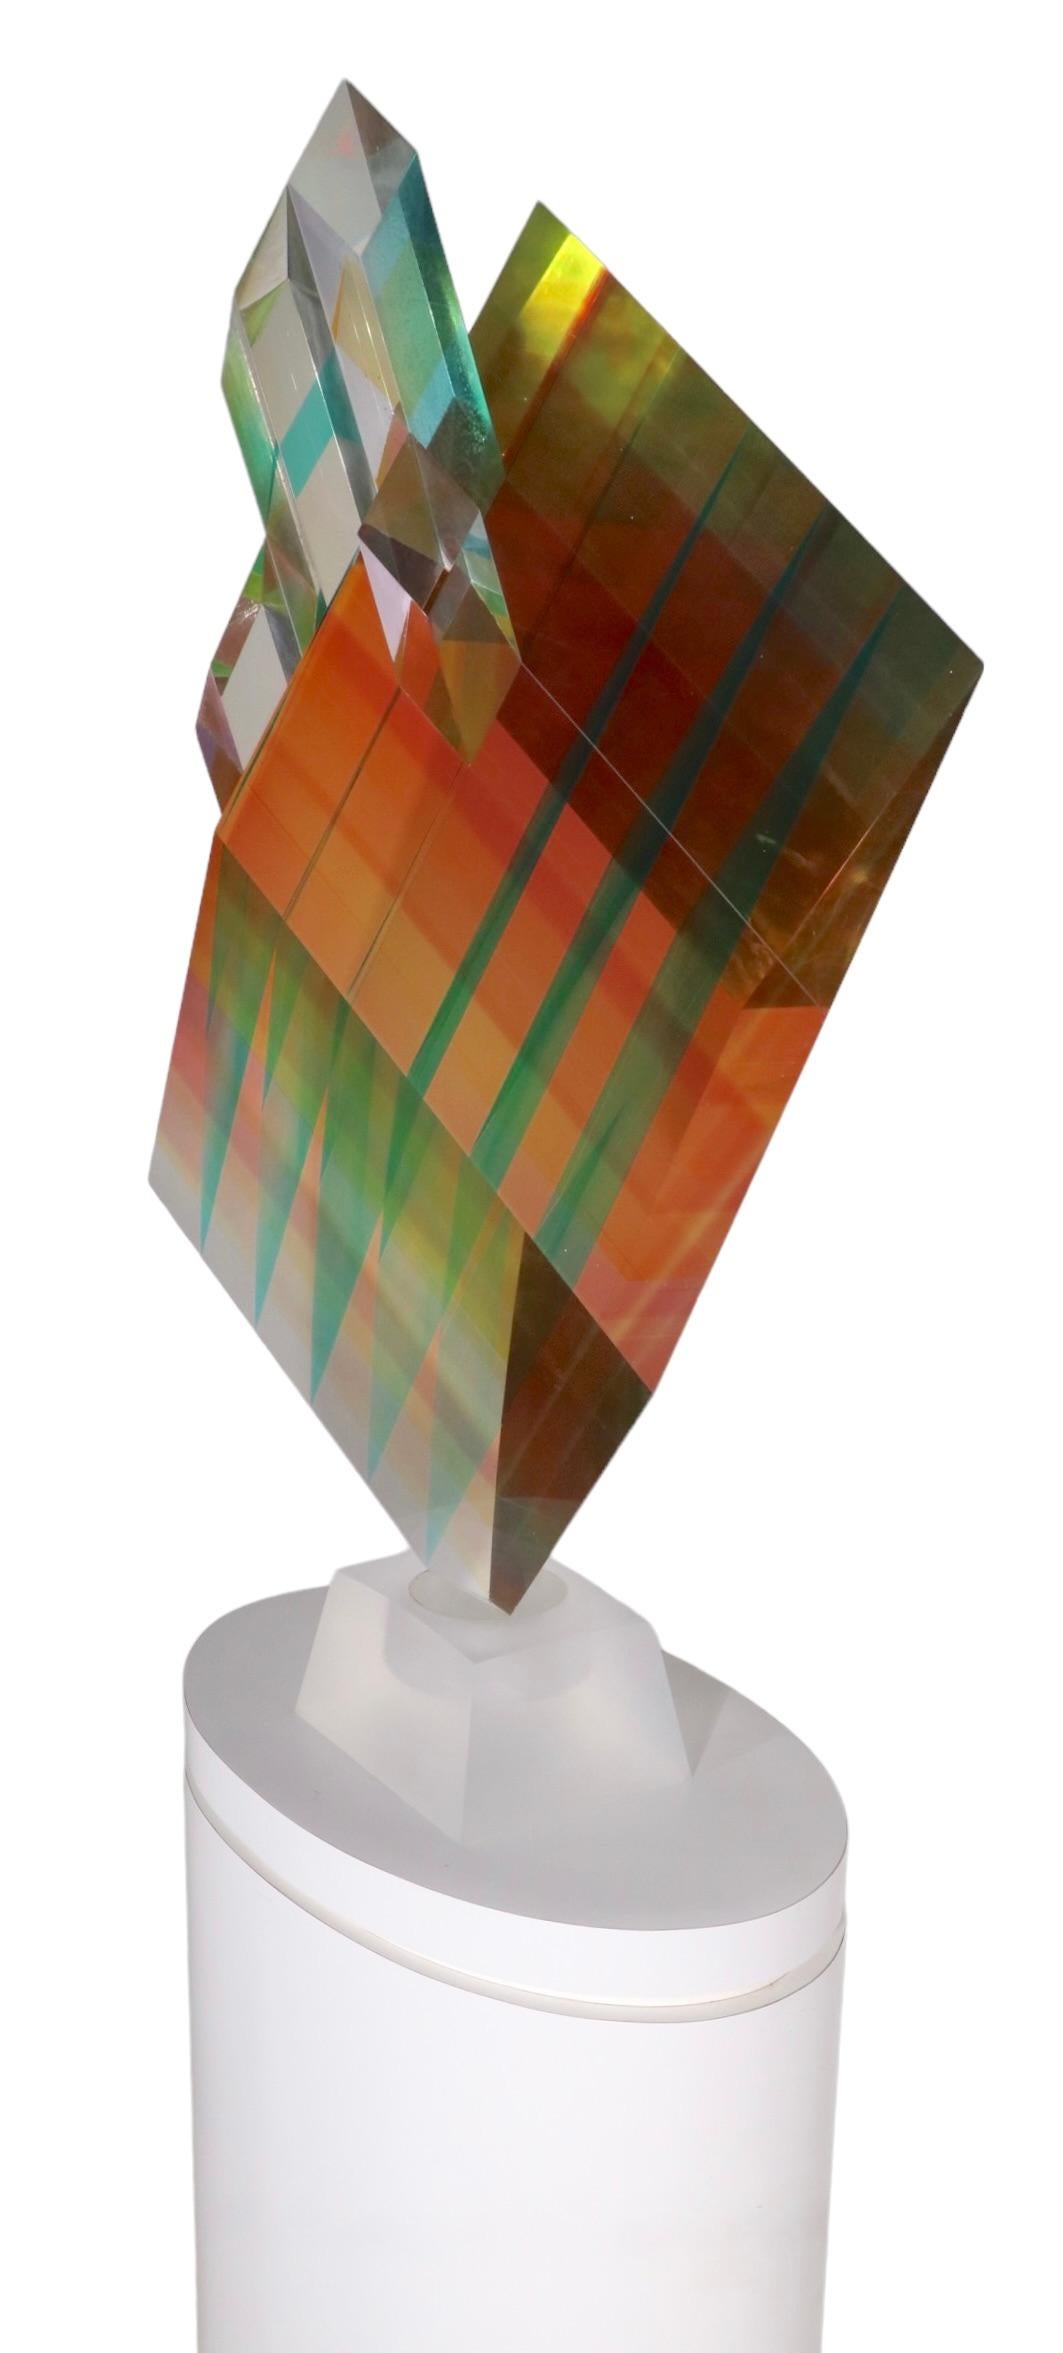 Large Post Modern Lucite Sculpture by Norman Mercer c 1991 For Sale 3